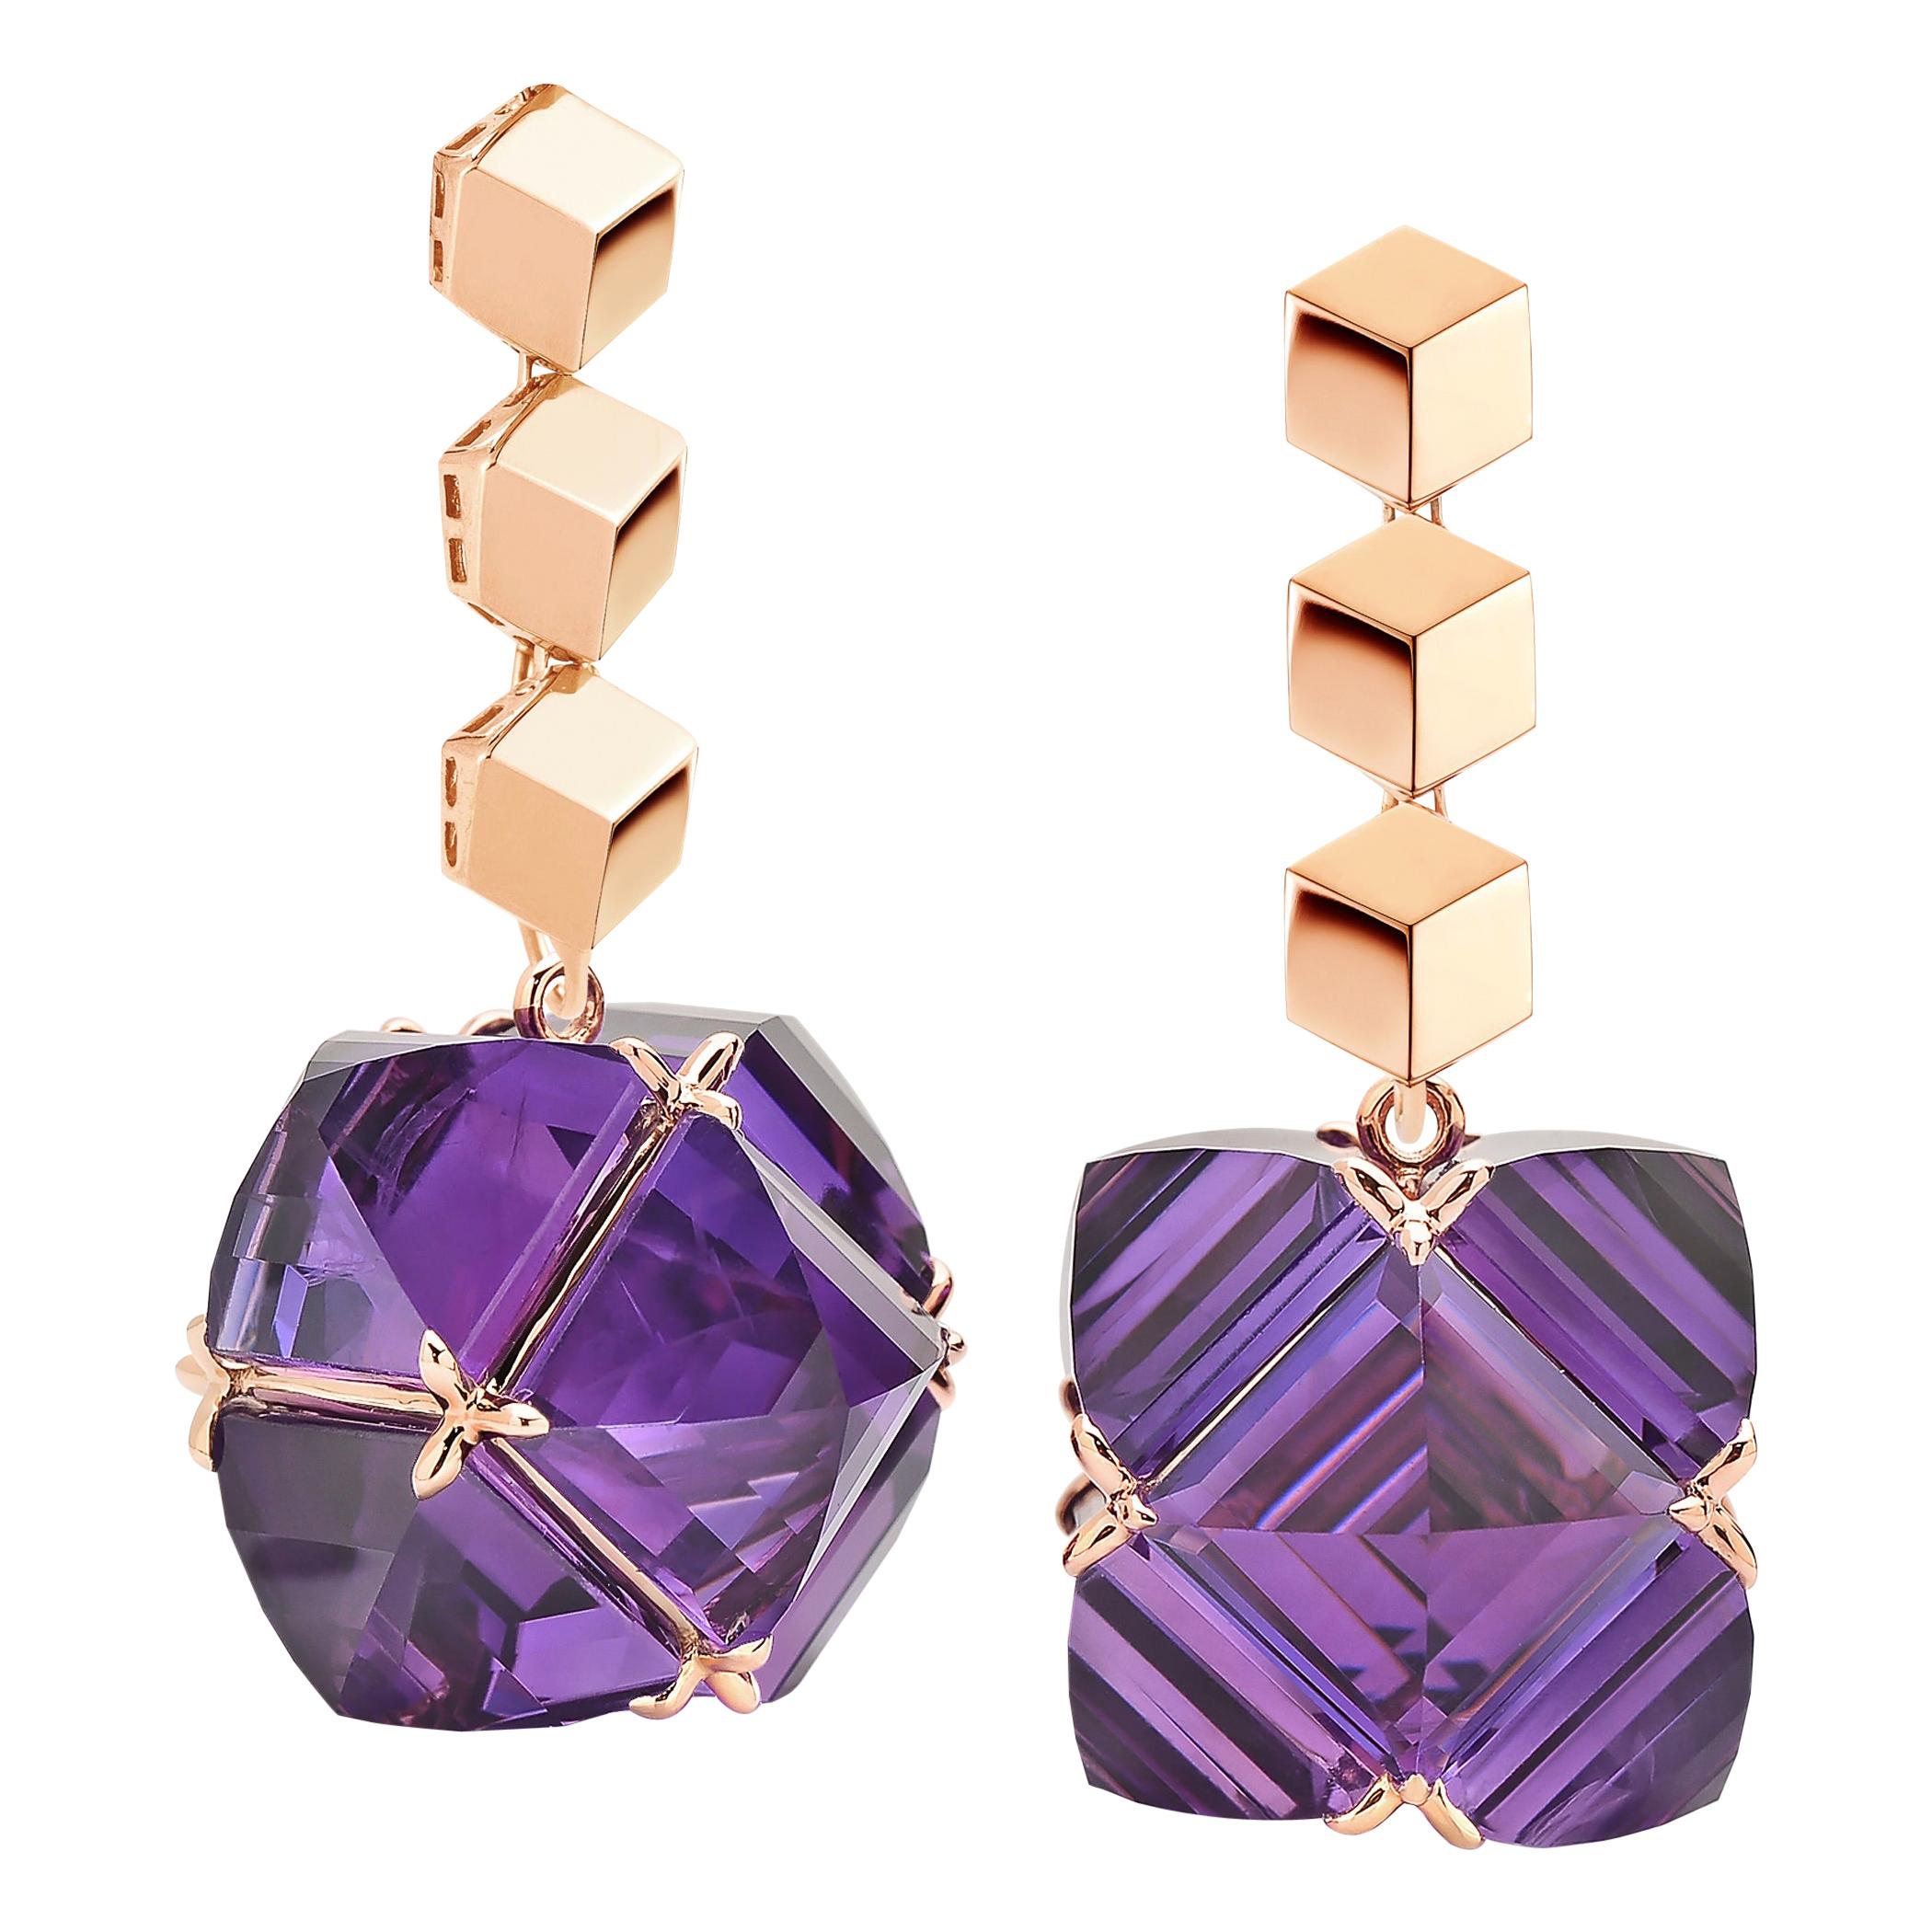 Paolo Costagli 18 Karat Rose Gold Brillante and Amethyst Very PC Earrings Grande For Sale